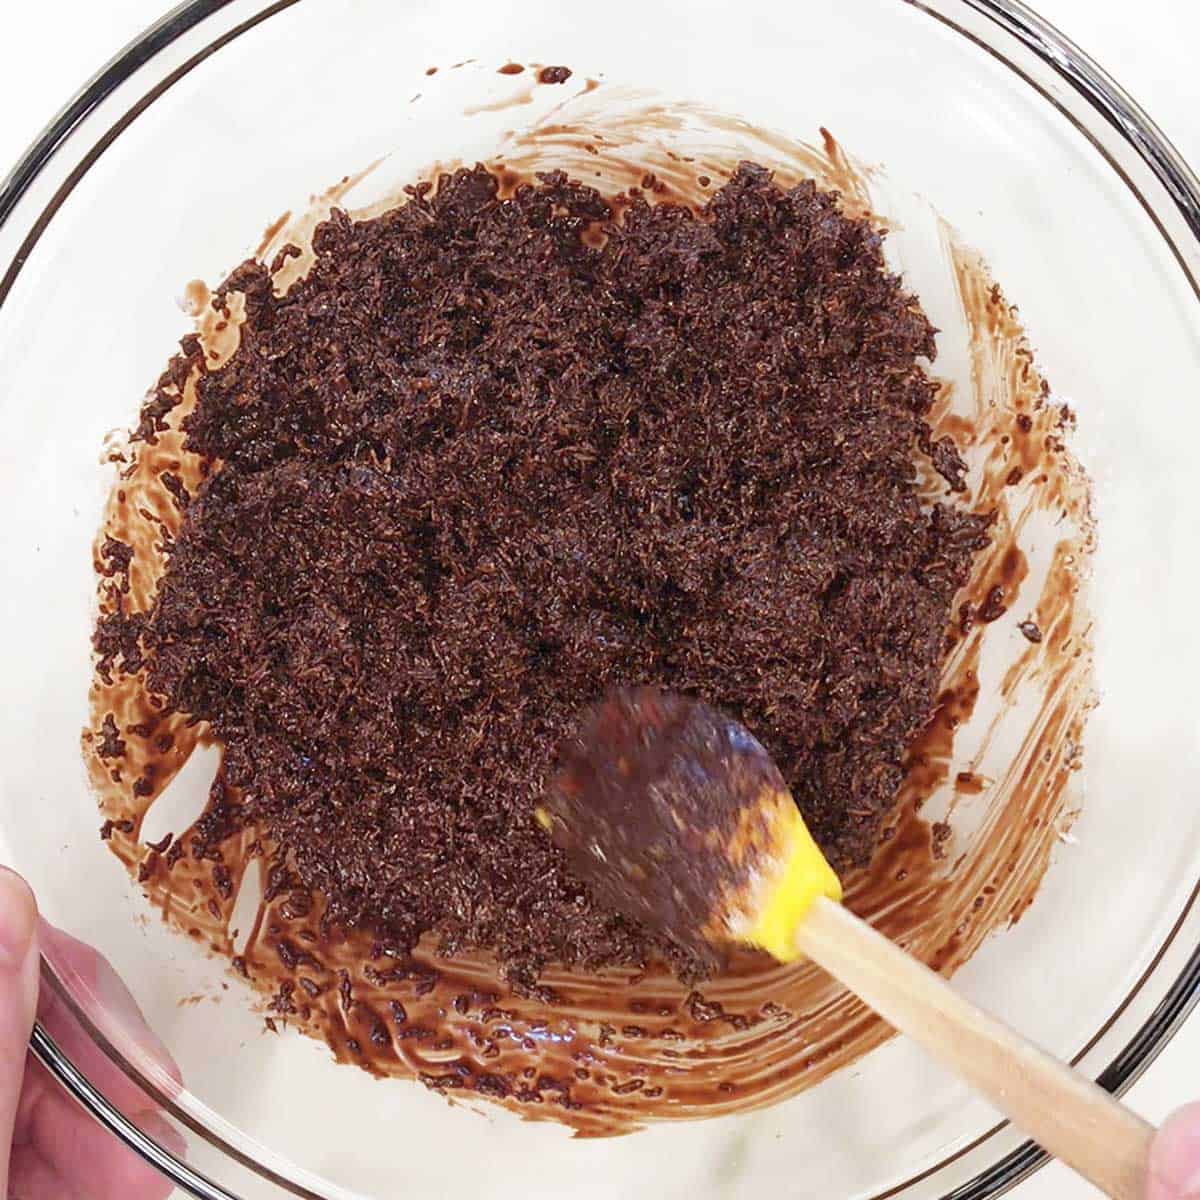 The shredded coconut is mixed thoroughly into the melted chocolate. 